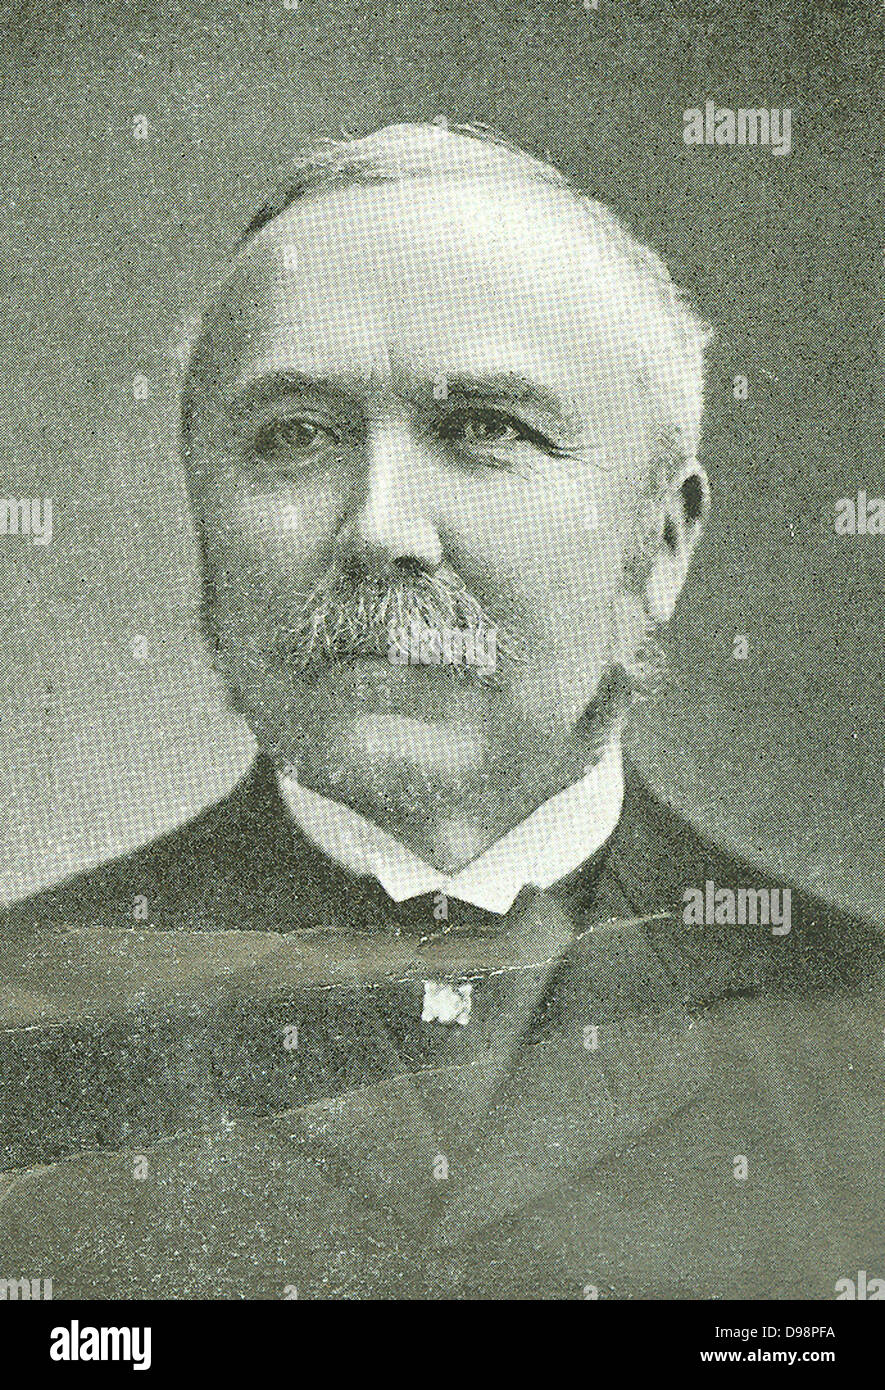 Sir Henry Campbell-Bannerman GCB (7 September 1836 – 22 April 1908) was a British Liberal Party politician who served as Prime Minister of the United Kingdom from 1905 to 1908 and Leader of the Liberal Party from 1899 to 1908 Stock Photo